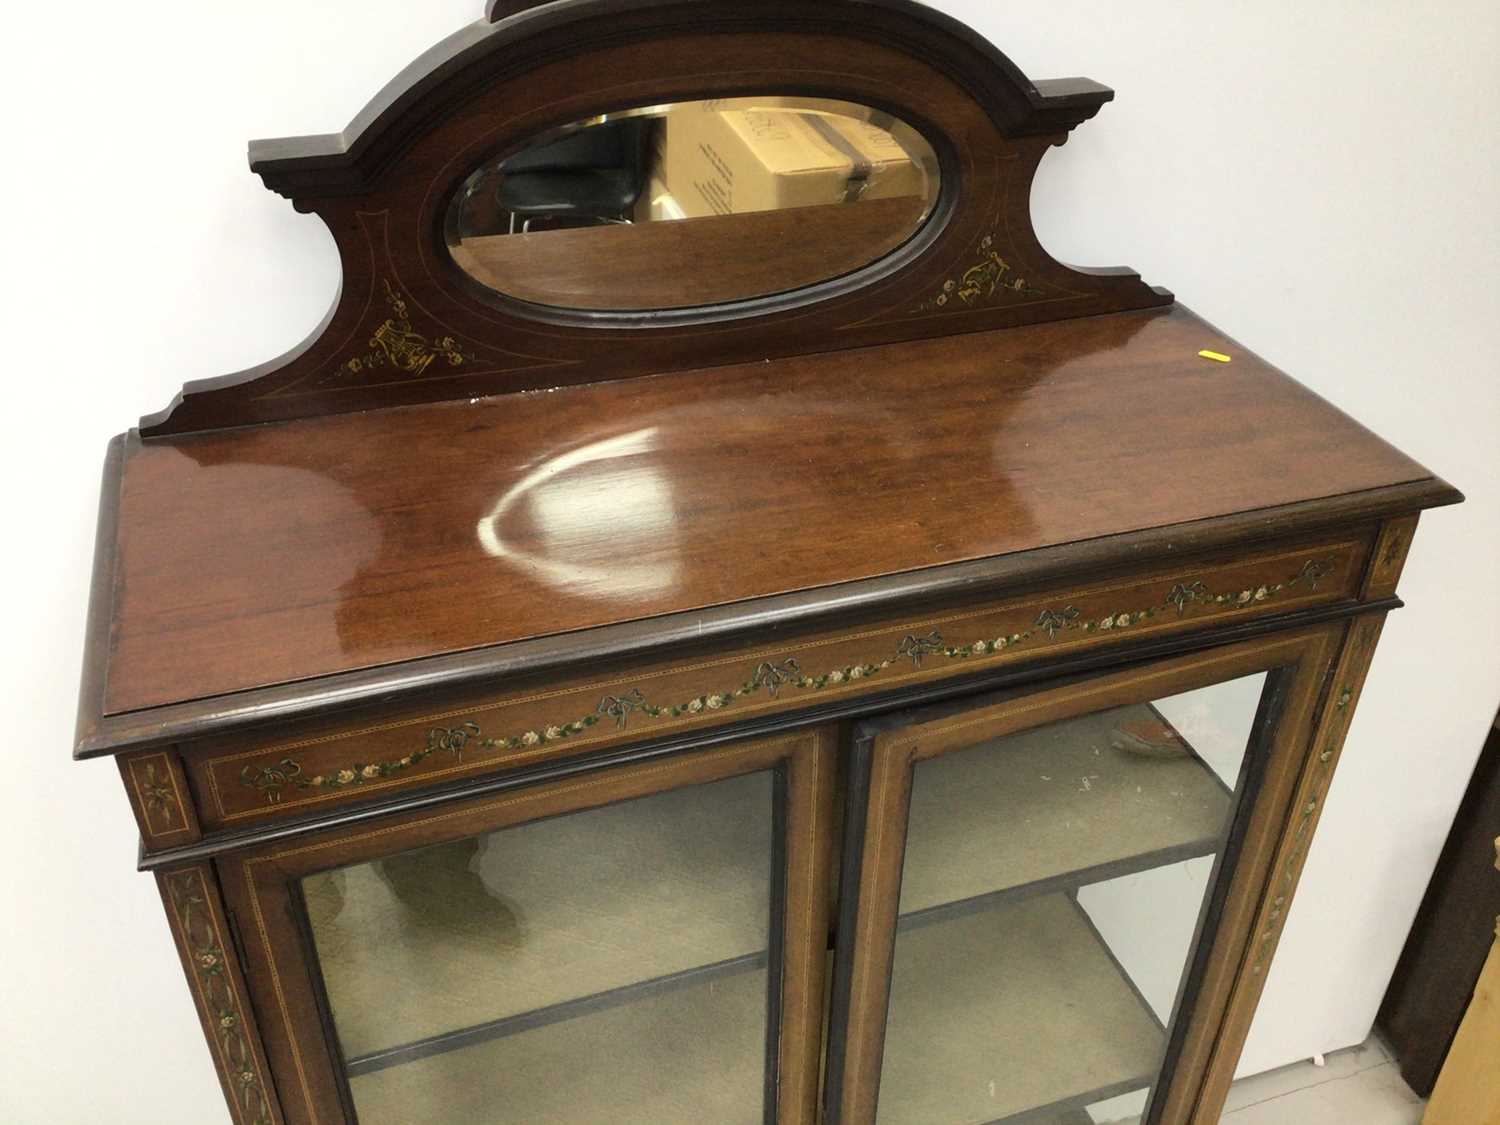 Edwardian inlaid mahogany display cabinet with bevelled mirrored back 91cm wide x 168cm high - Image 3 of 5